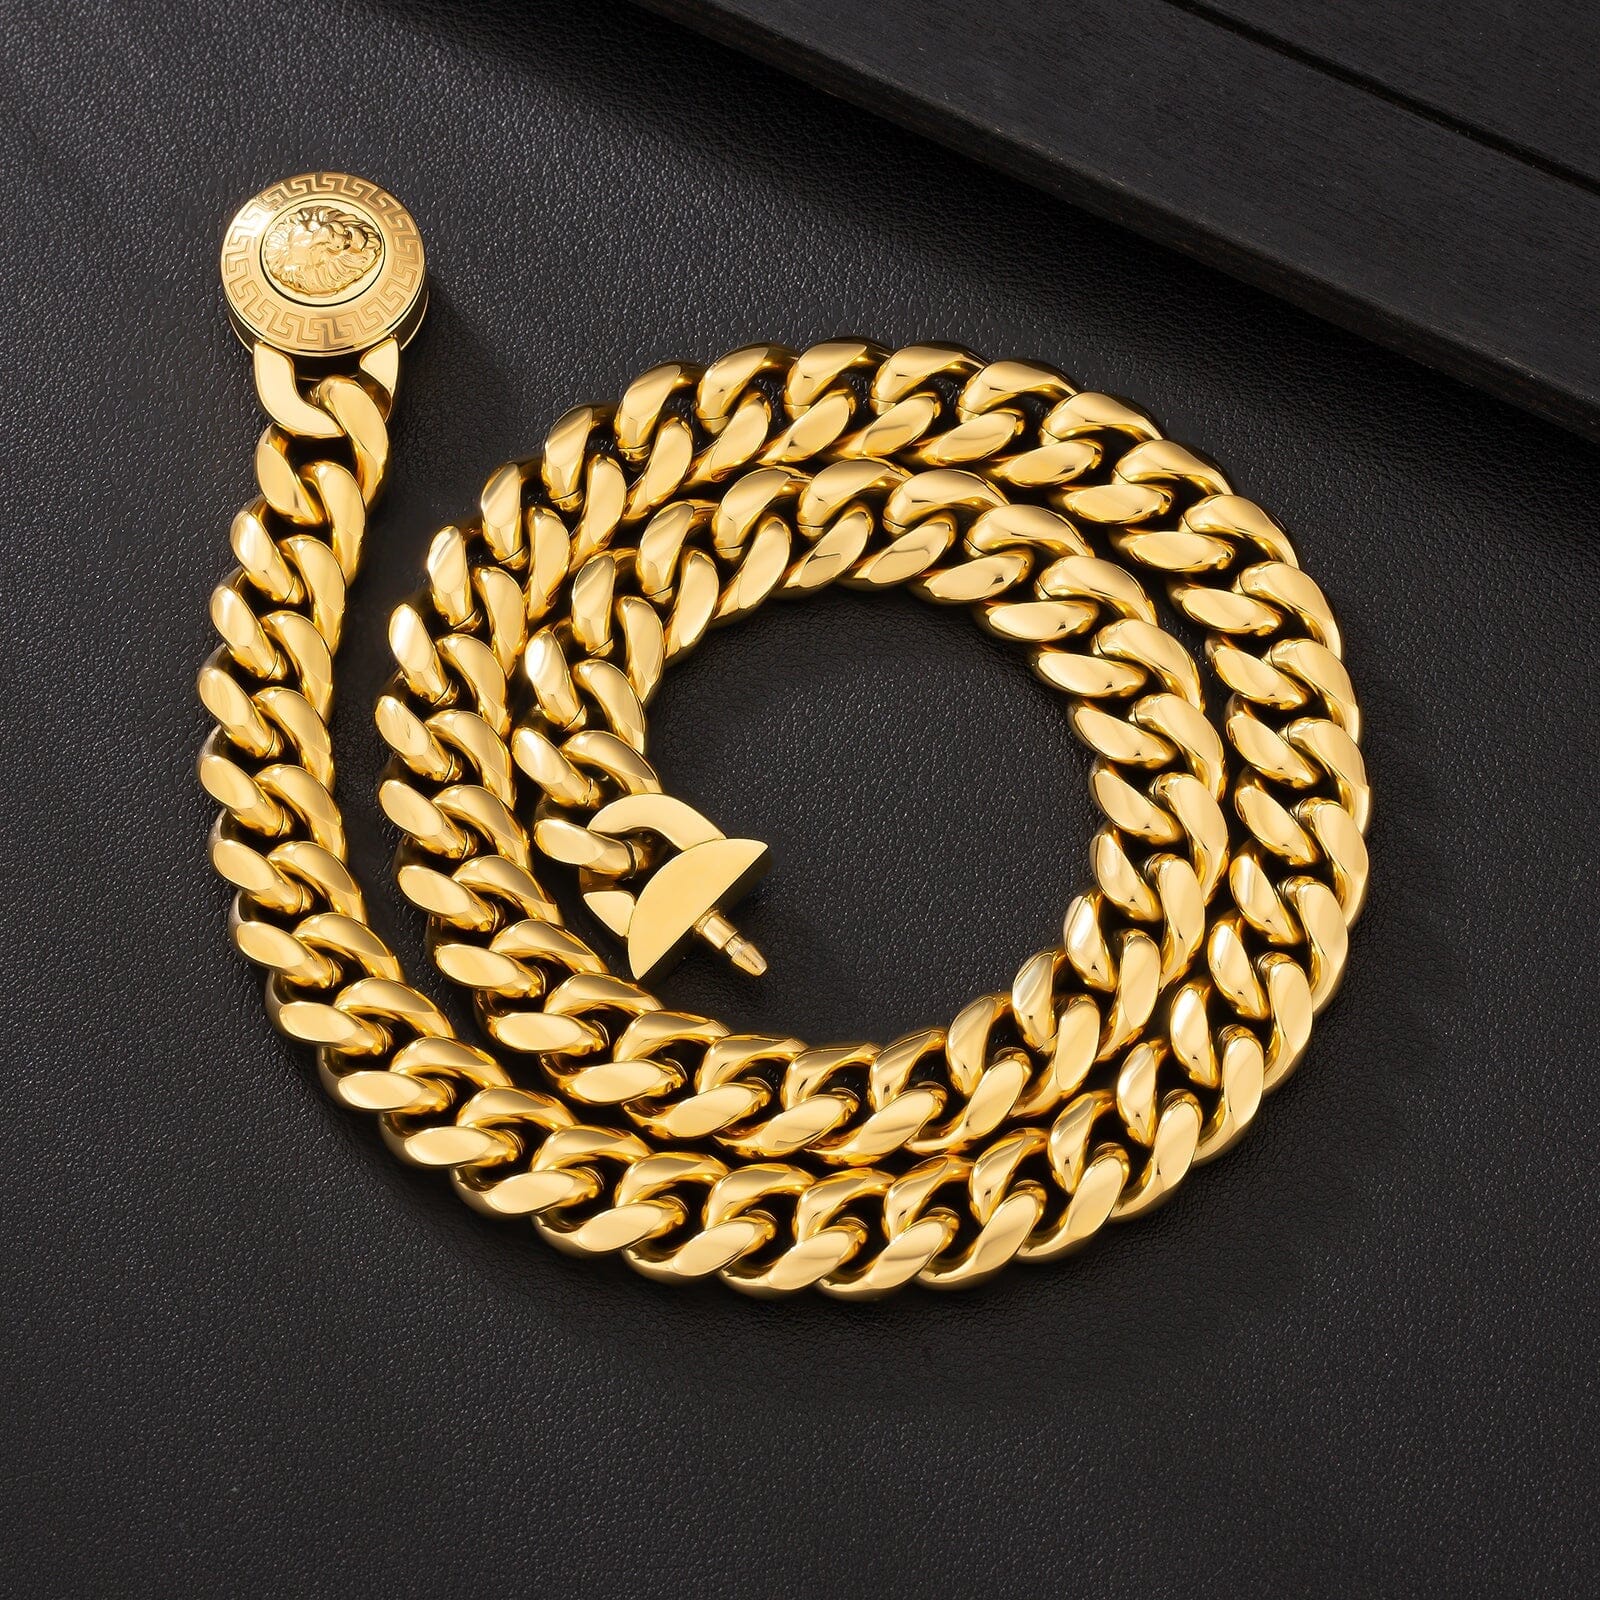 The King - 12mm Cuban Link Chain in 18K Gold Plated Necklaces 